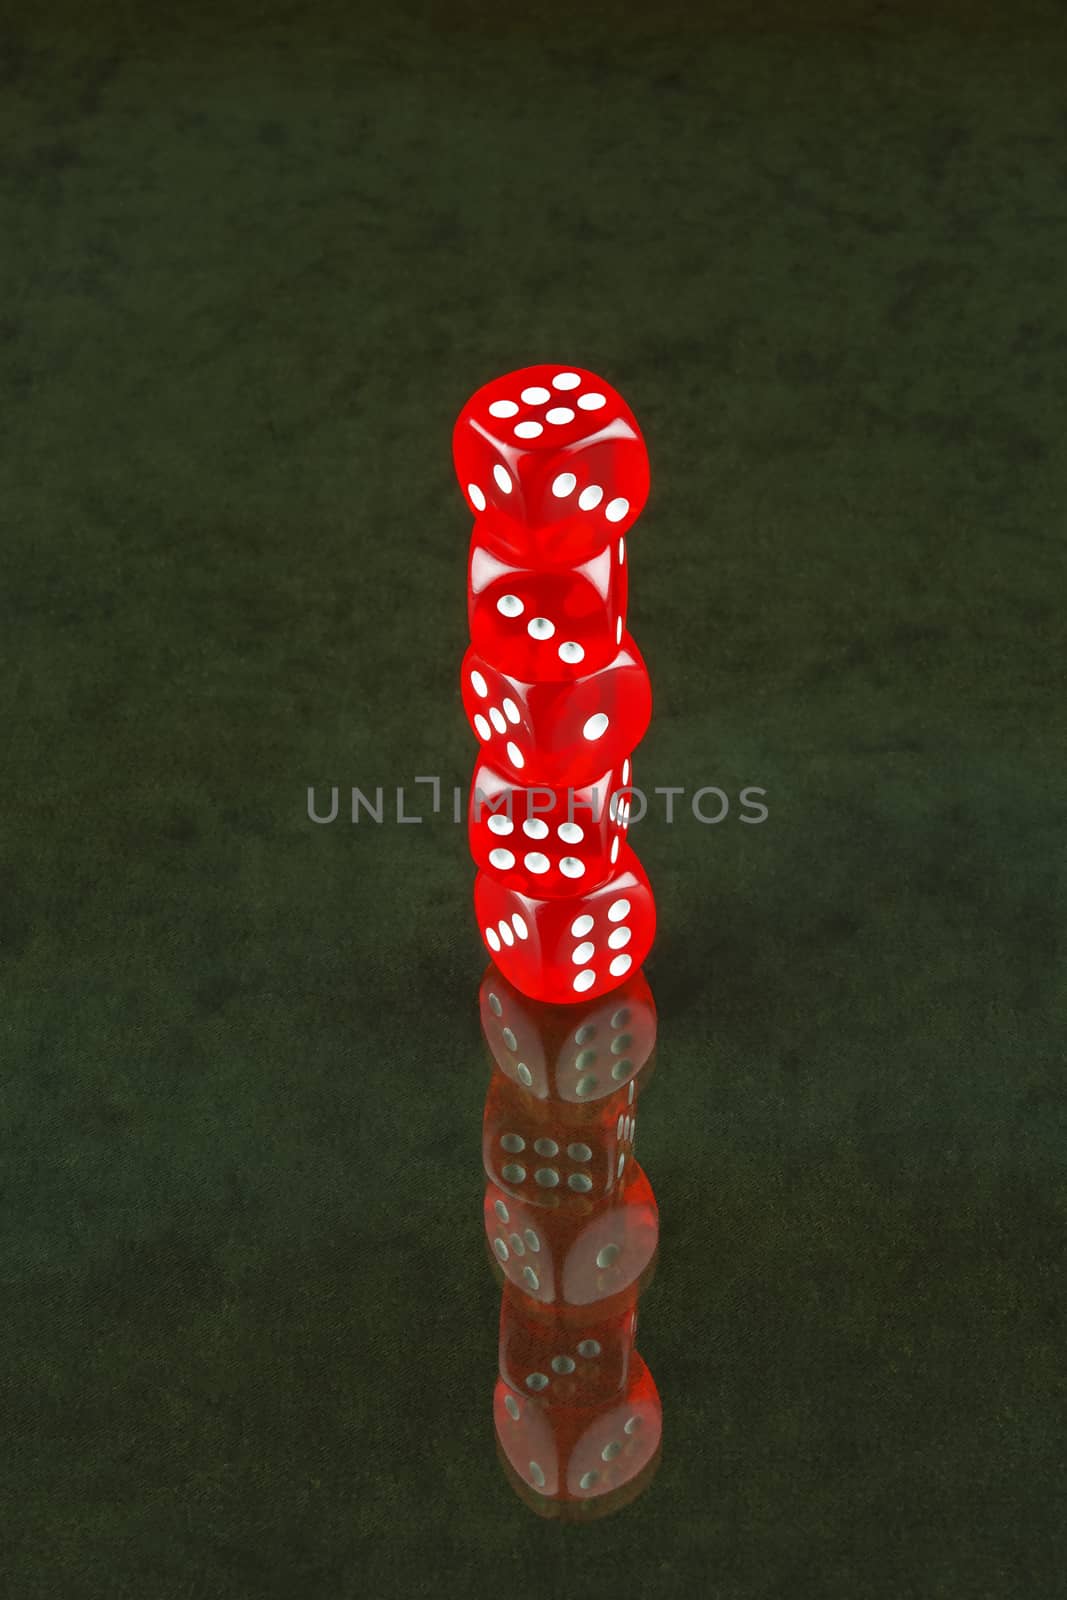 The glass surface reflects red dice poker by Grommik